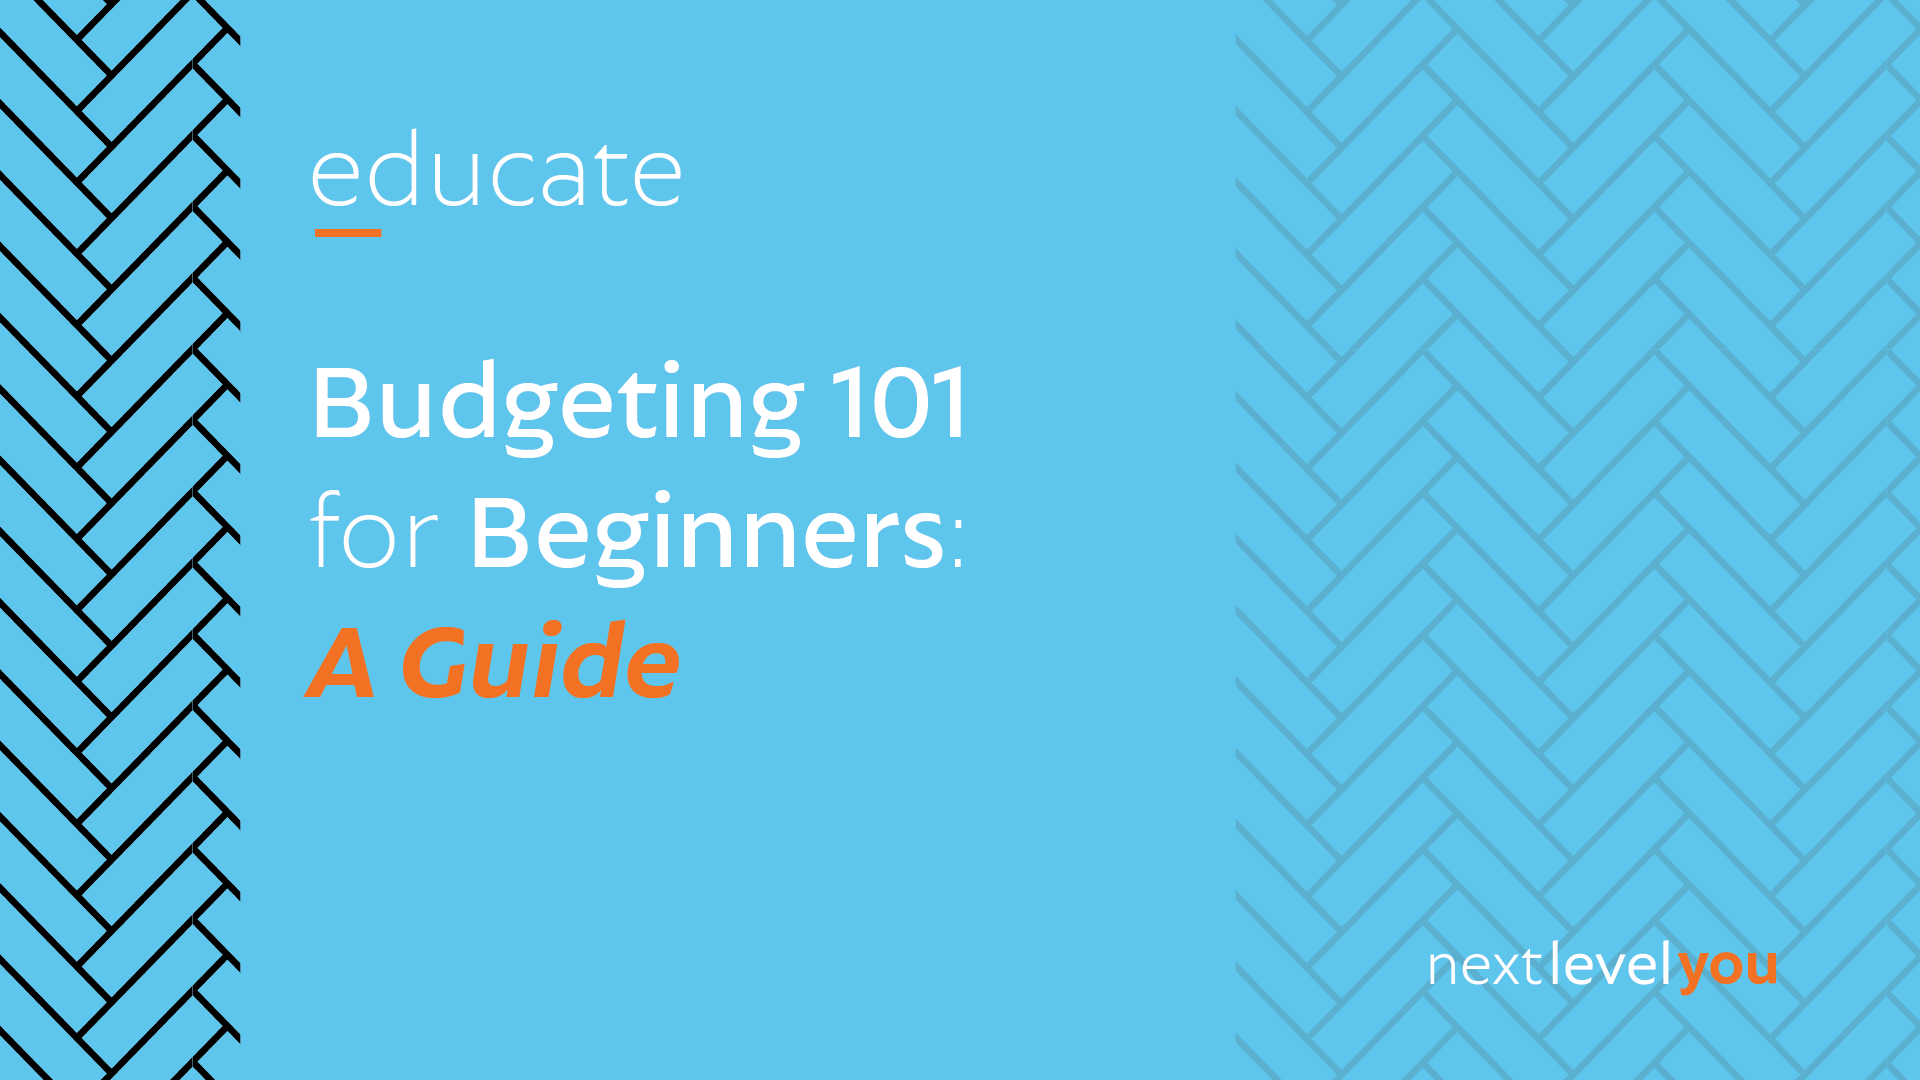 No more money stress: Budgeting 101 for beginners